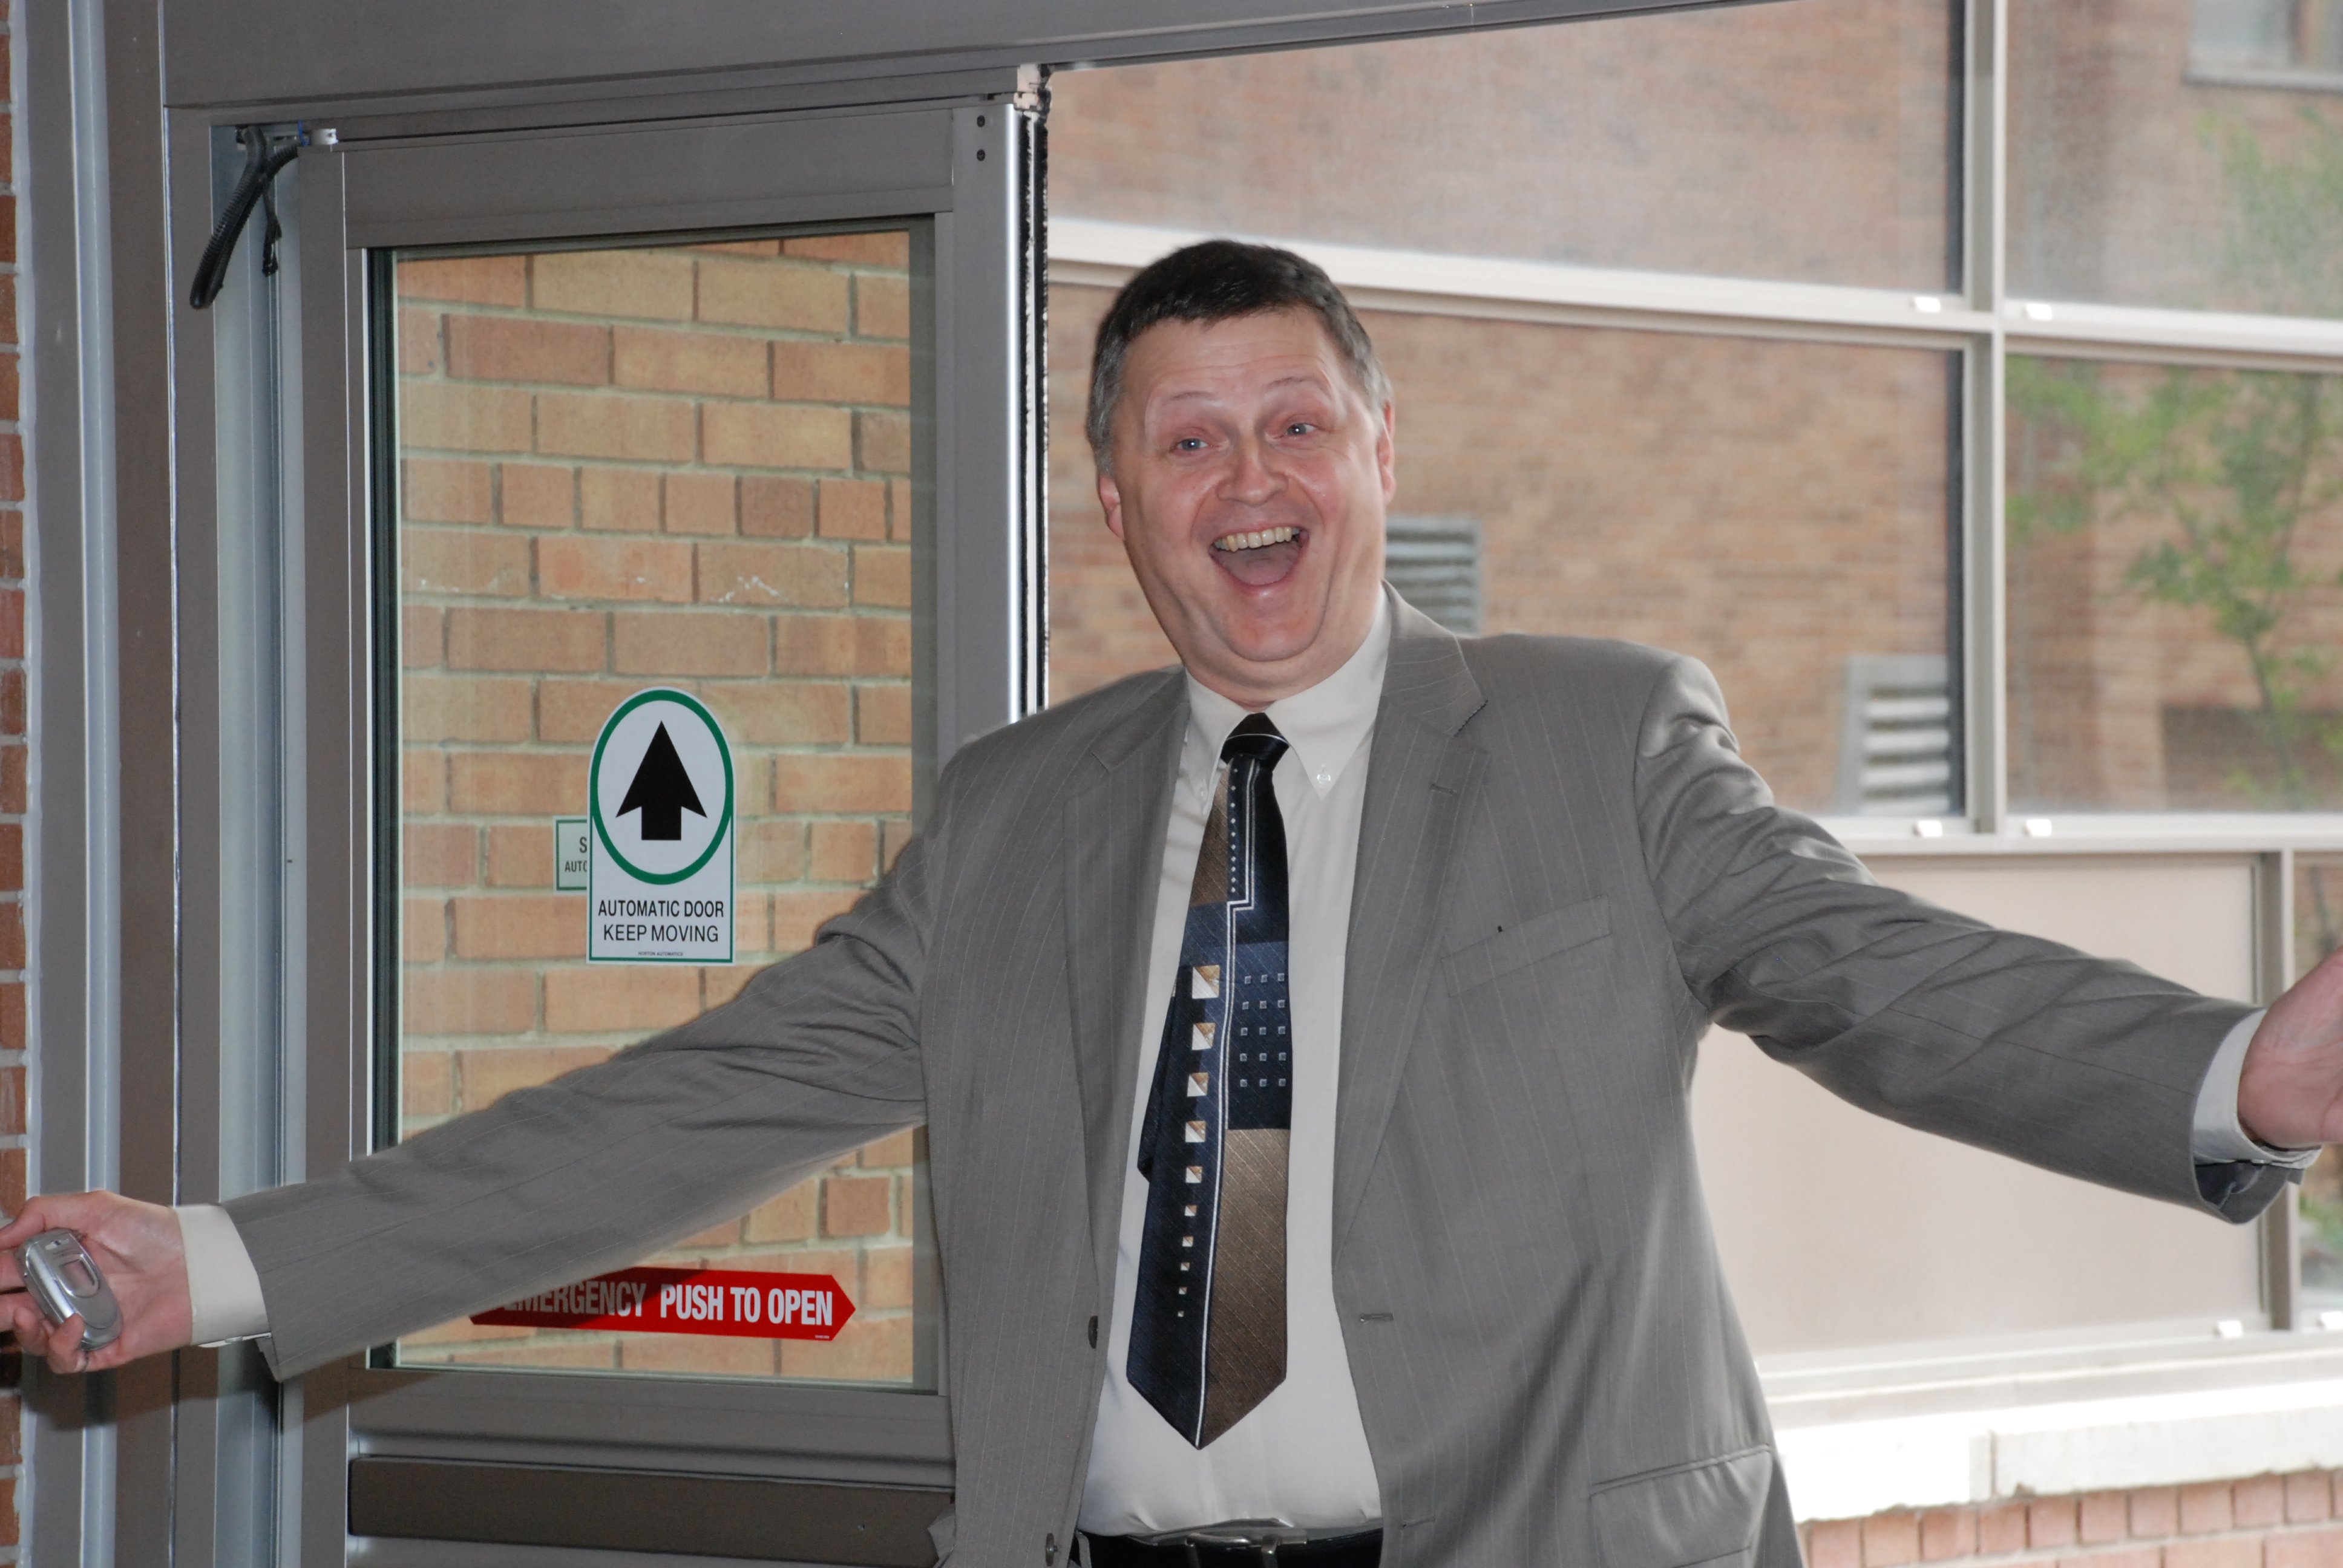 Alt: Doug Ruth entering building with a large, open mouth smile and arms extended with enthusiasm.